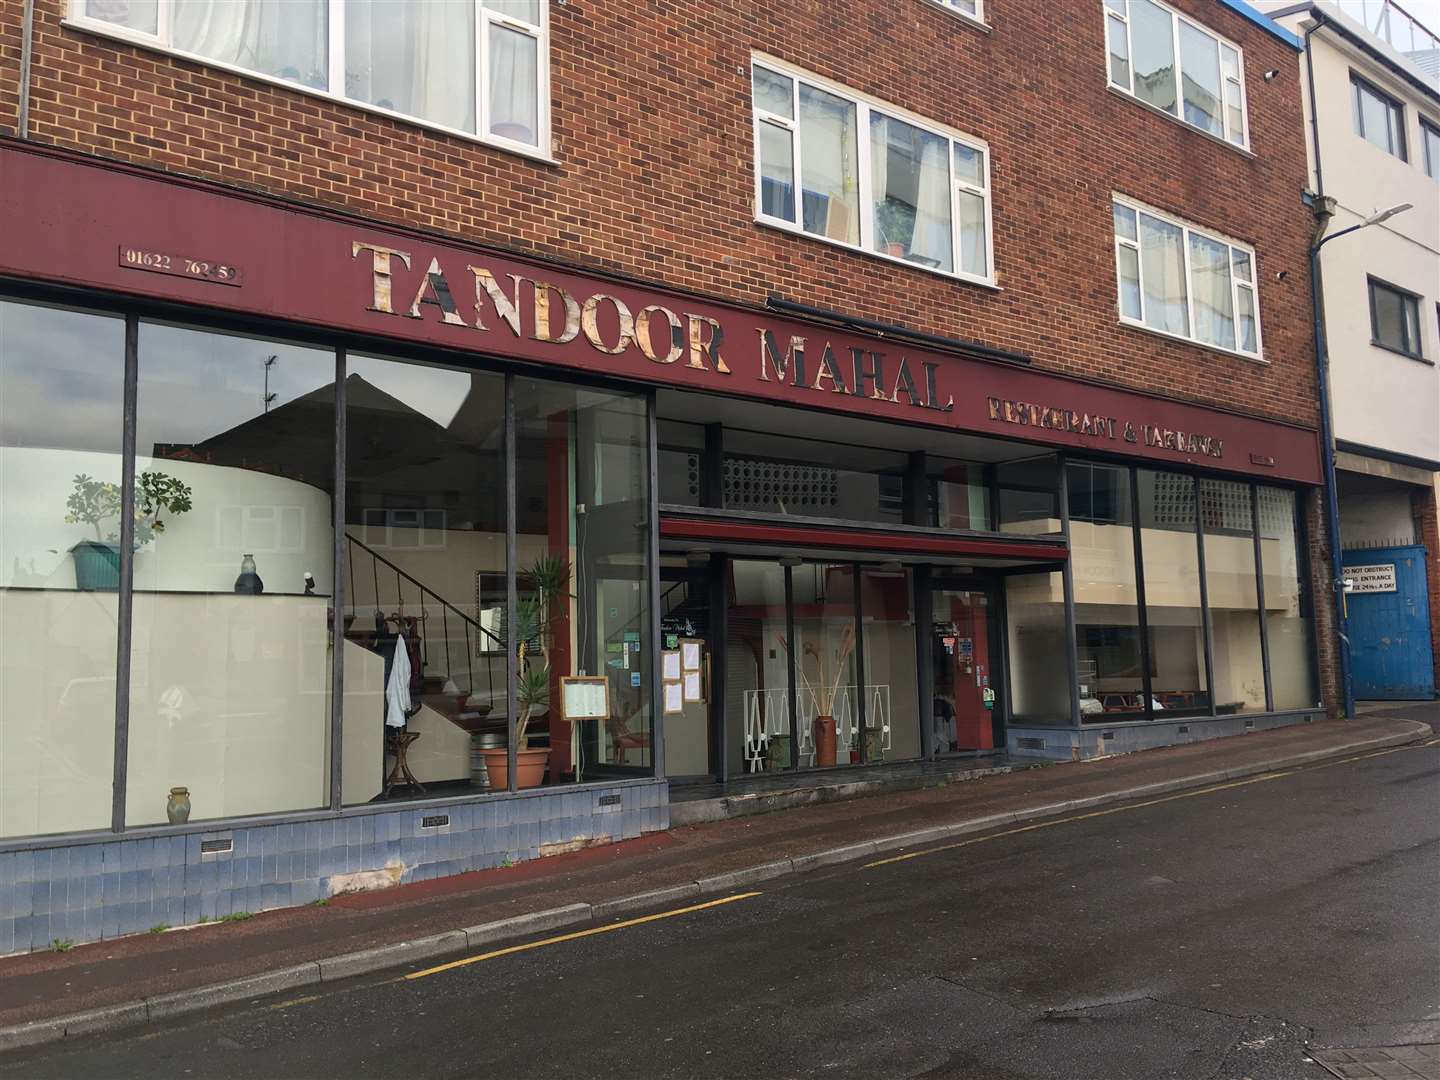 Tandoor Mahal in Medway Street, Maidstone, is currently closed